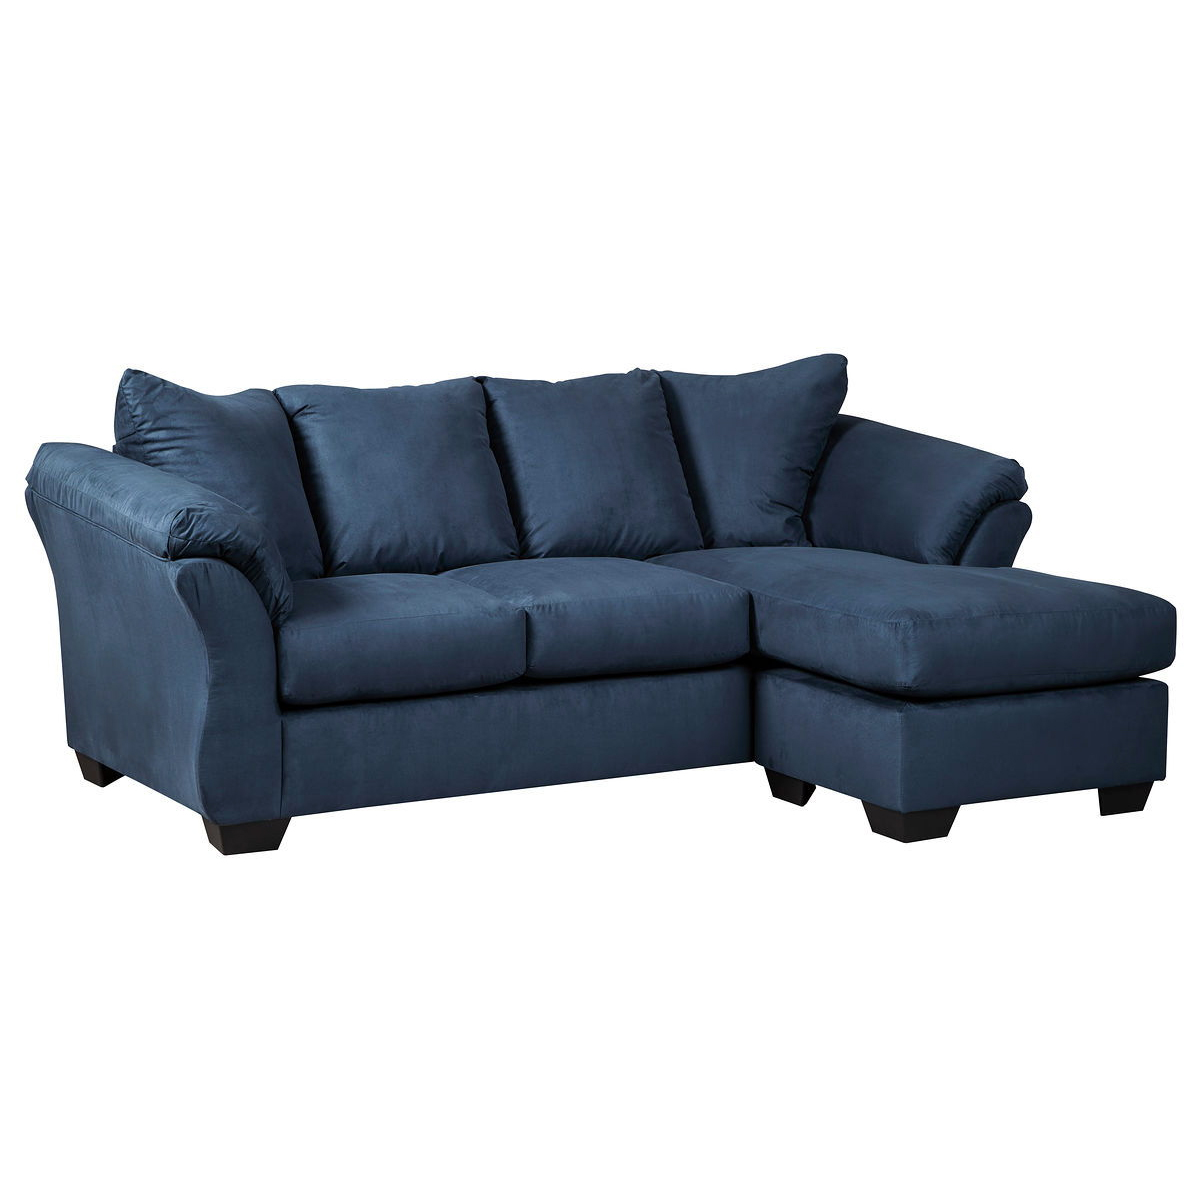 Darcy - Blue - Sofa Chaise